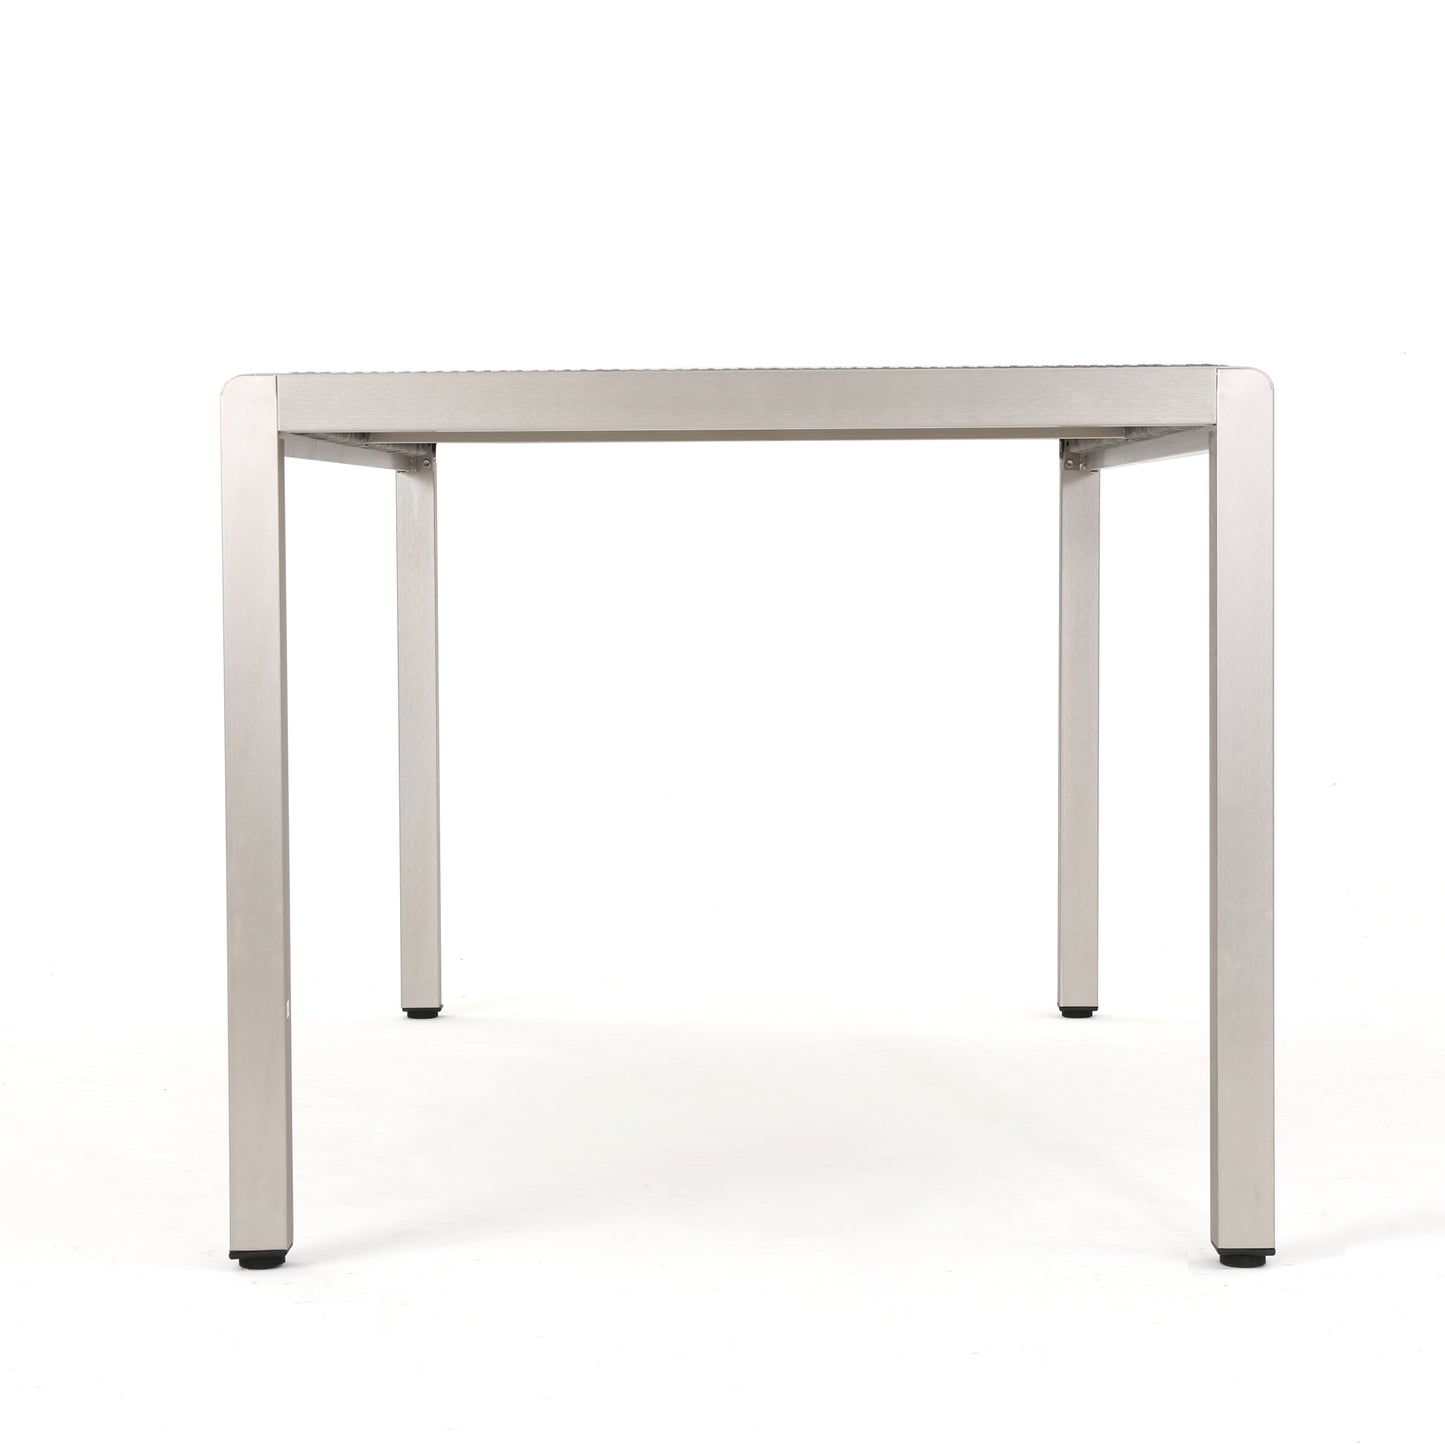 Coral Bay Outdoor Aluminum Dining Table w/ Wicker Top